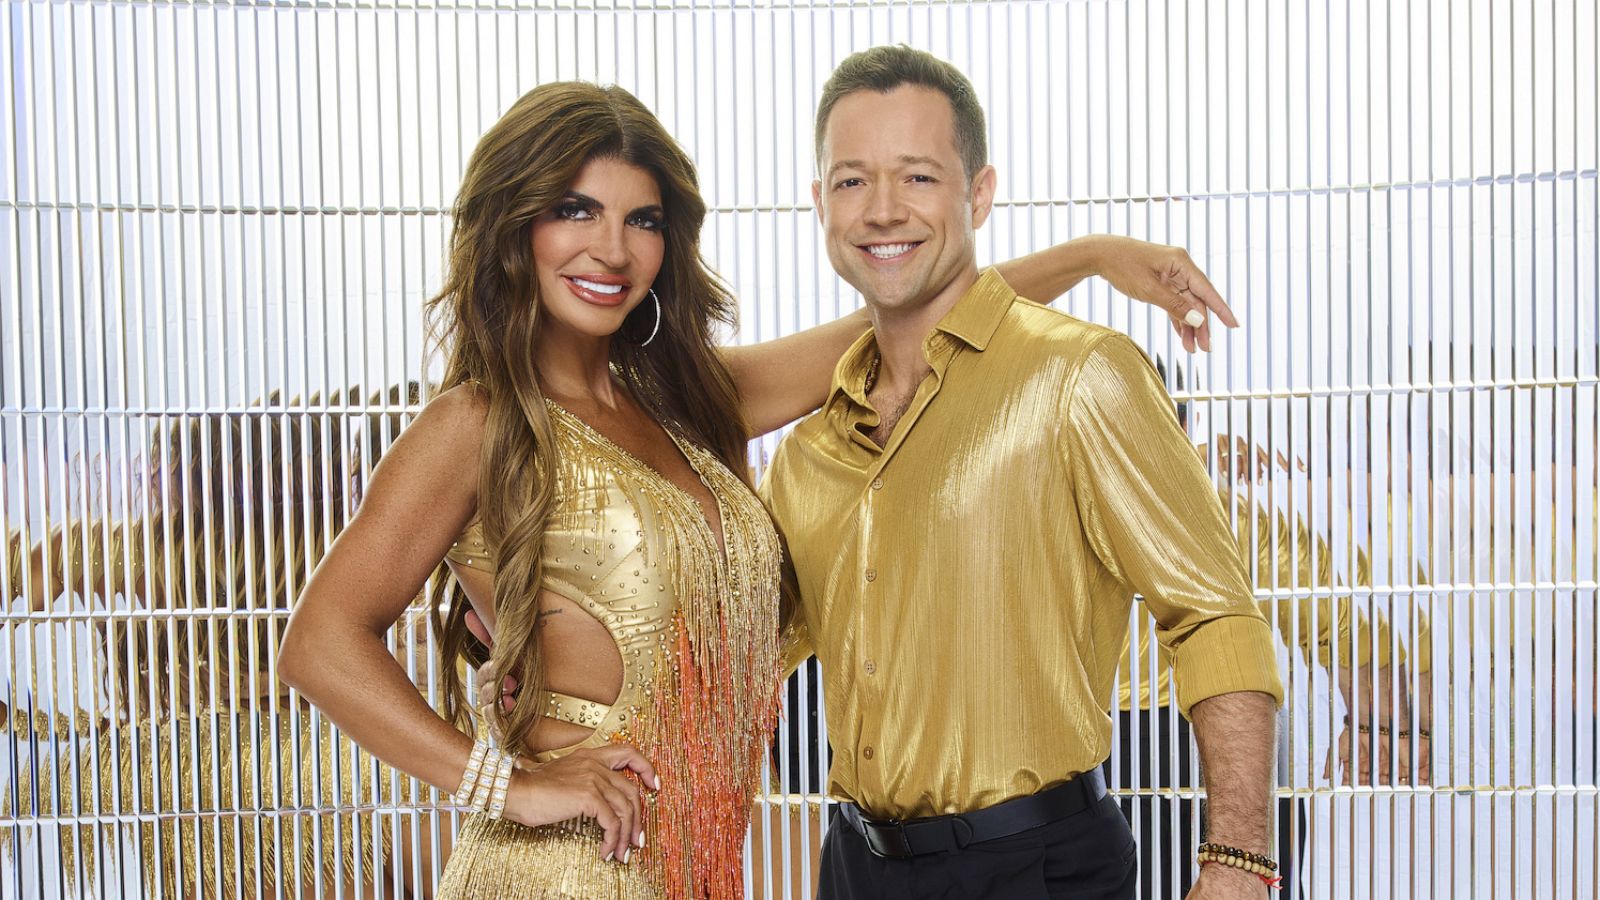 Dancing with the Stars 2022 See the official season 31 partner photos image